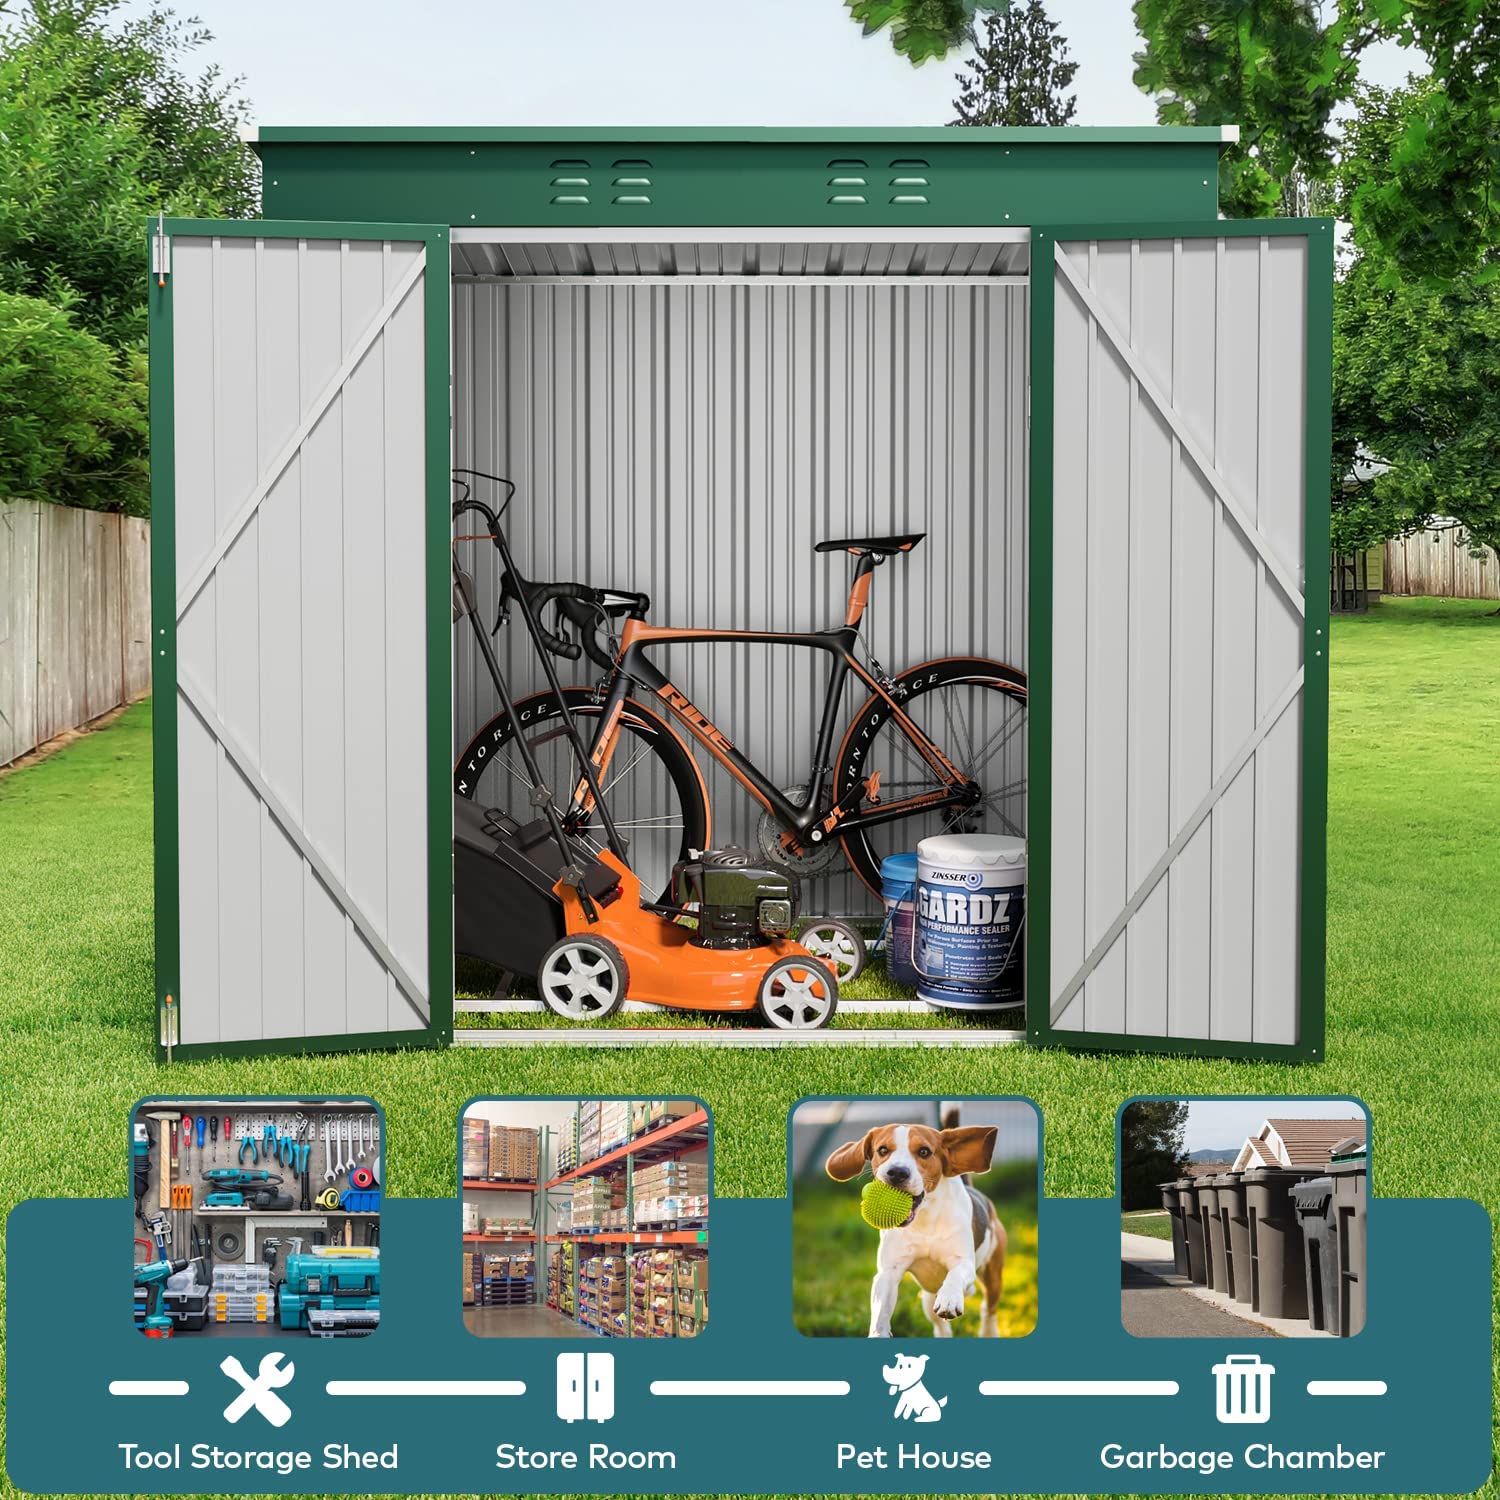 Aiho 6'x 4' Outdoor Storage Shed with Lockable Door for Garden Backyard Patio - Green - image 5 of 11